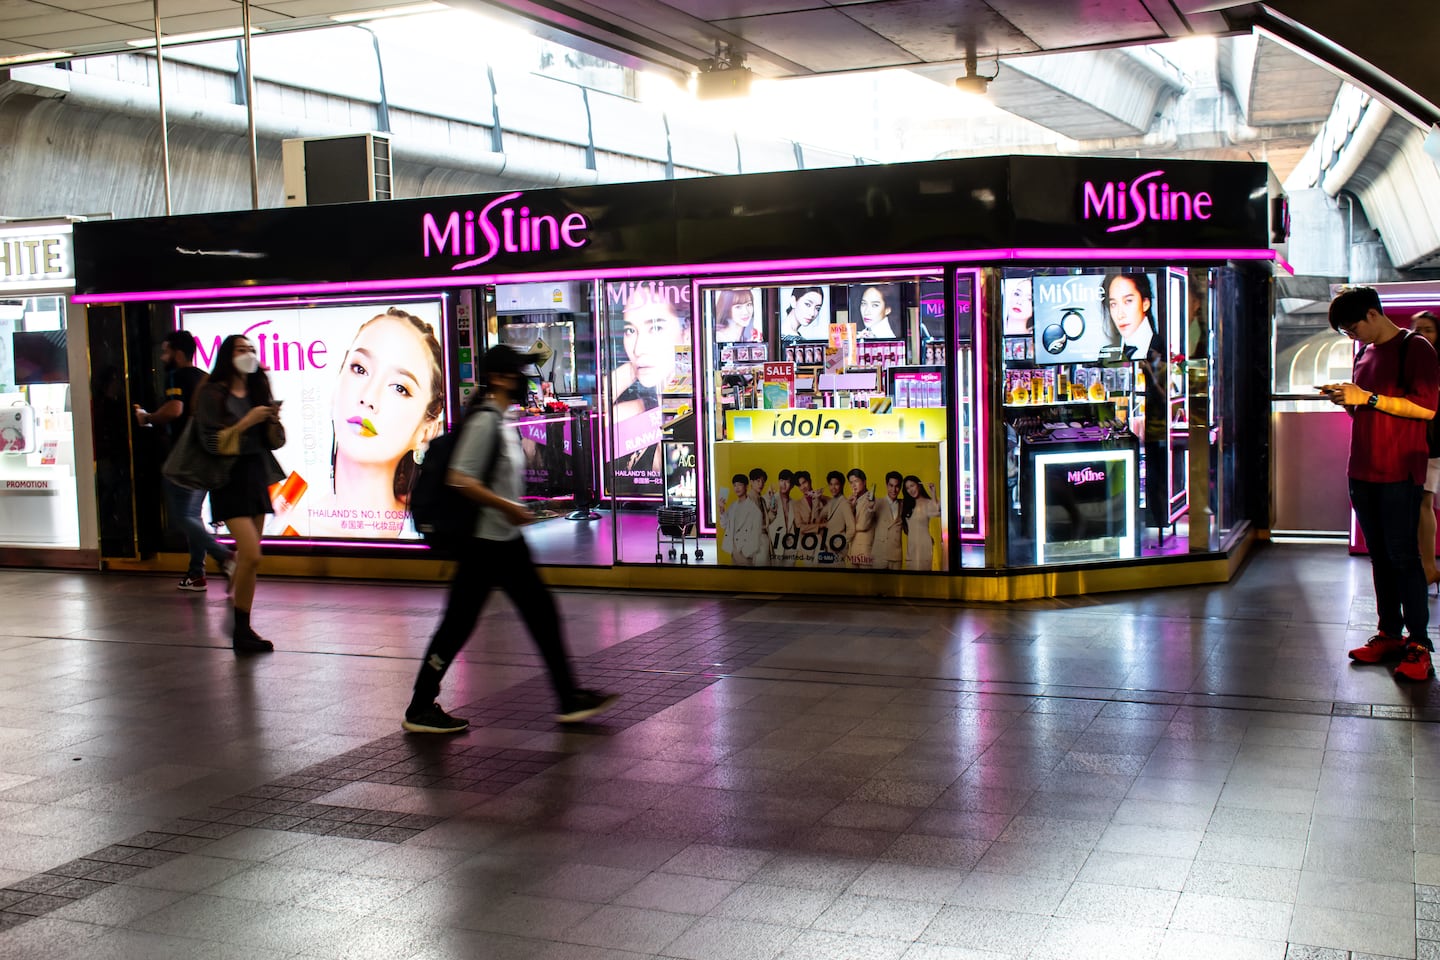 The exterior of a Mistine store in Bangkok.